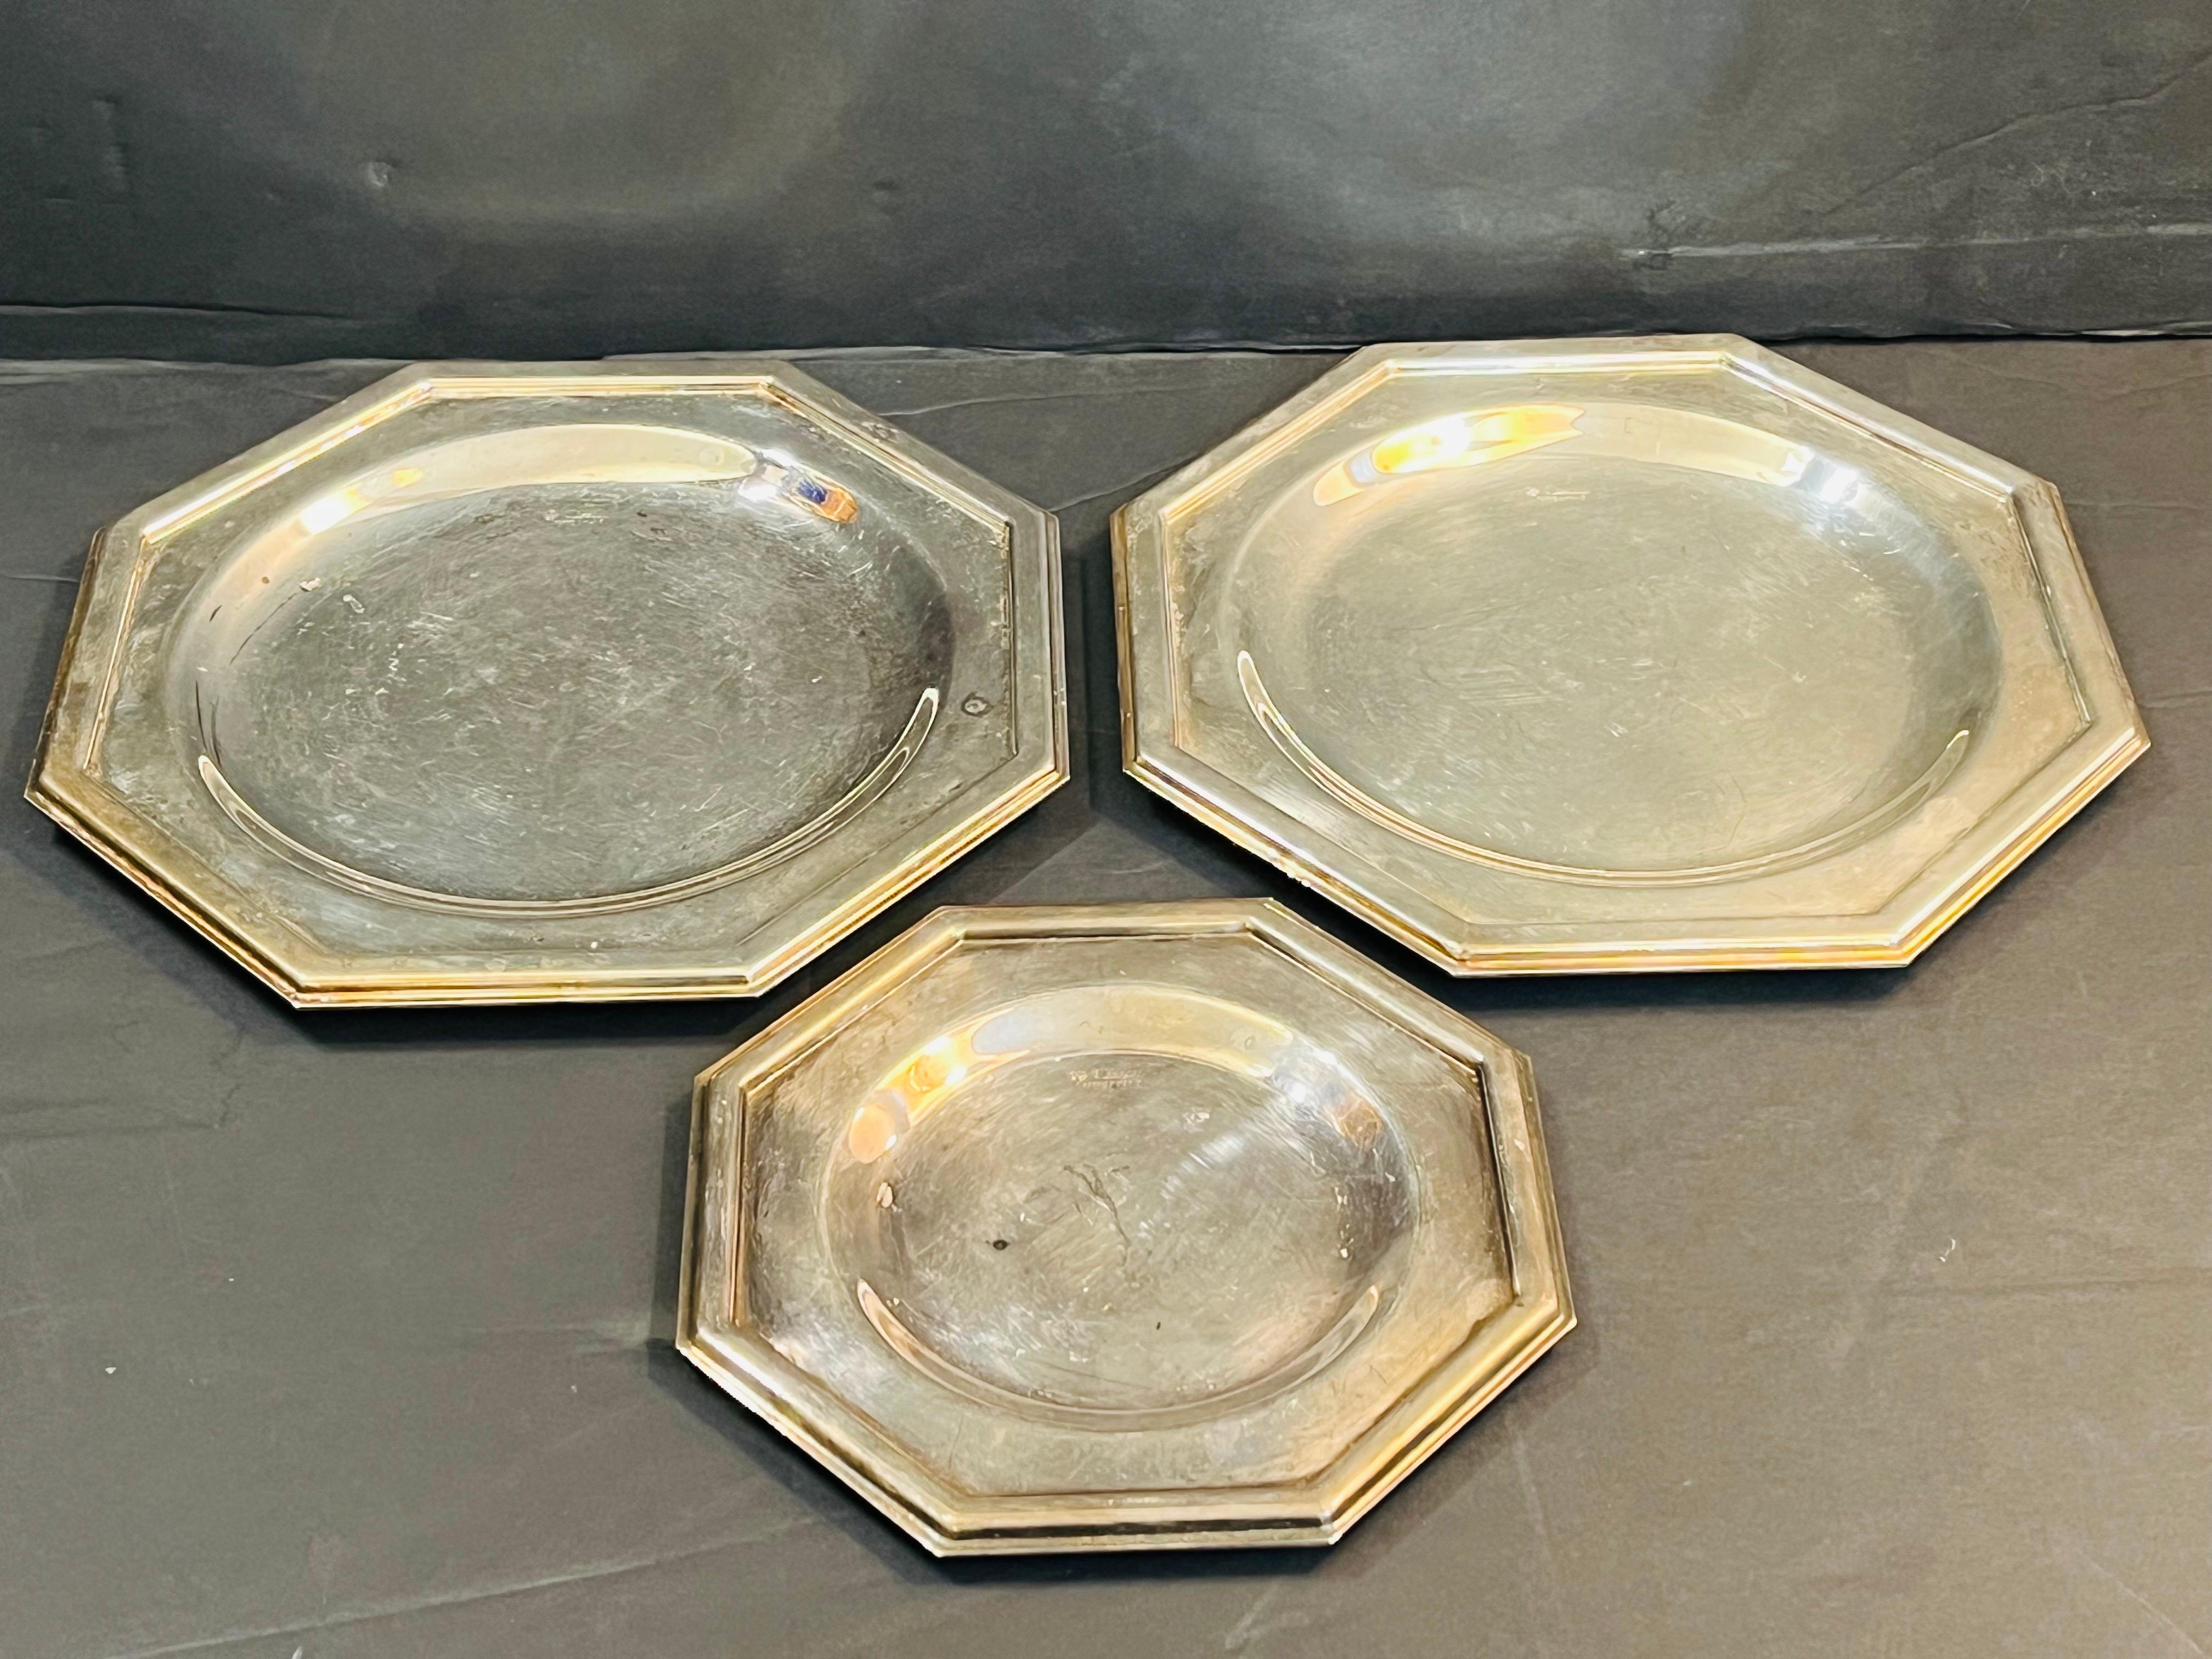 A set of three vintage, mid to late 20th century octagonal shaped platters in silver plate by Italian maker Cassetti. The Cassetti firm was founded in Italy in 1926 by Renzo Cassetti. The three plates have strong Art Deco style lines and all are of